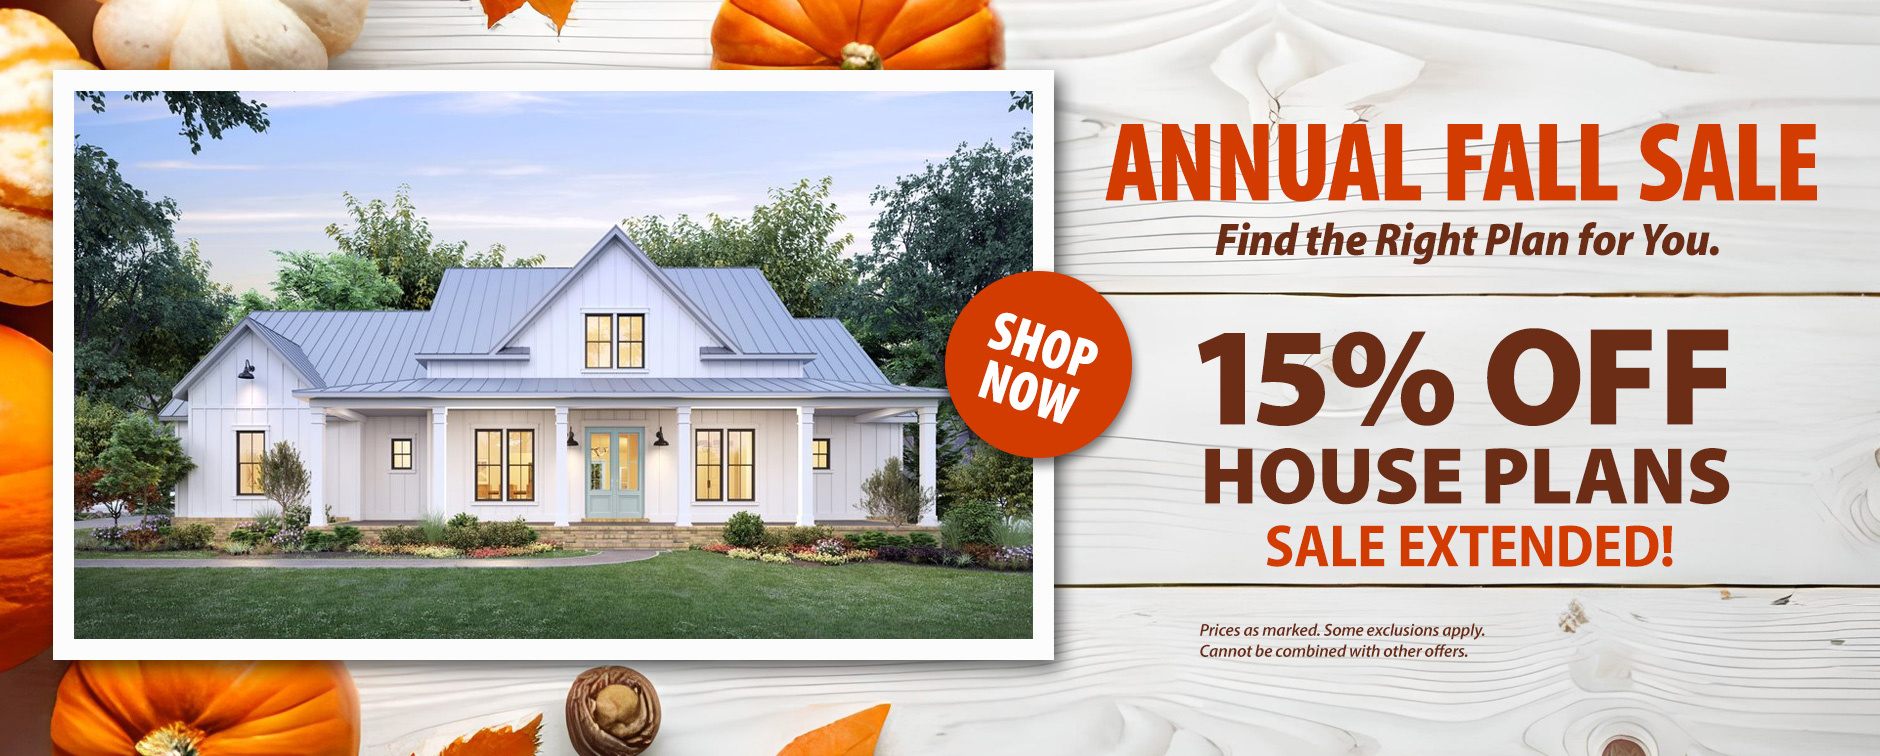 Annual Fall Sale Extended: Save 15% on Home Plans